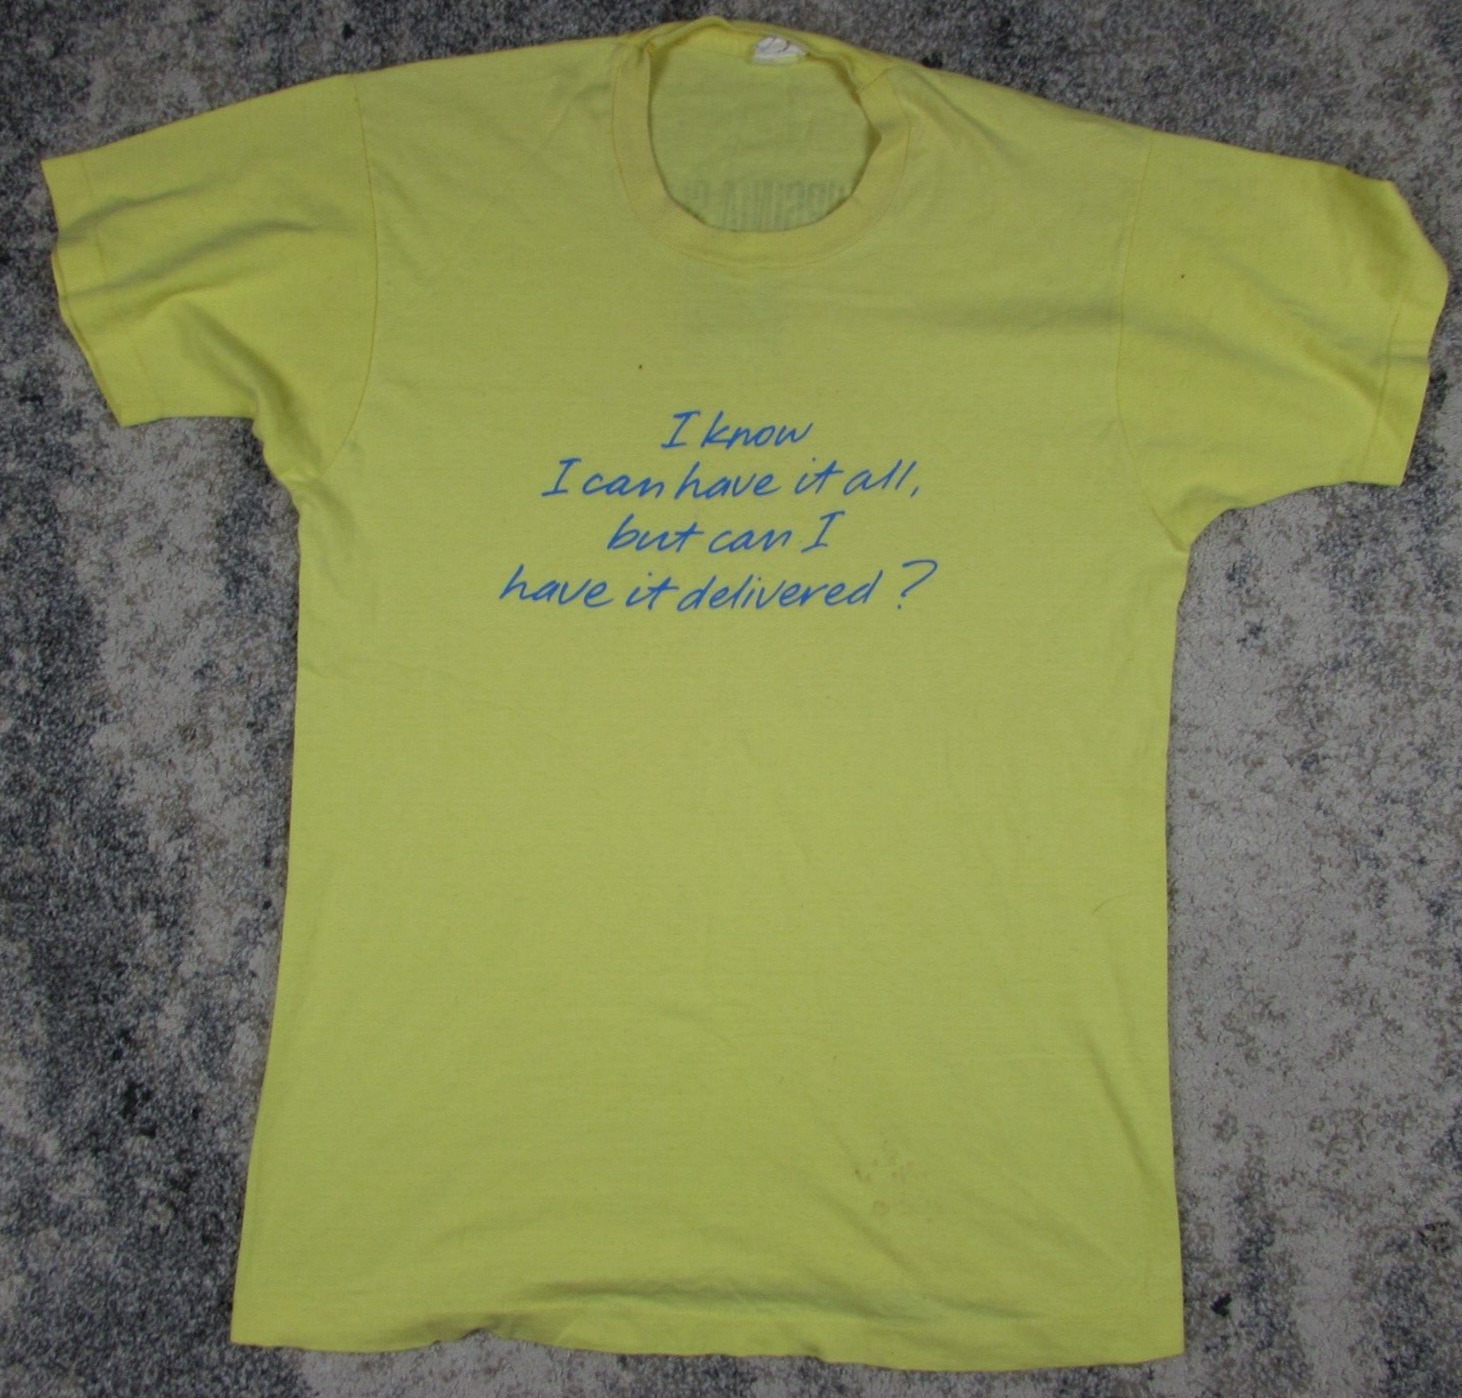 Vintage Virginia Slims Shirt Adult One Size Yellow Single Stitch Distressed